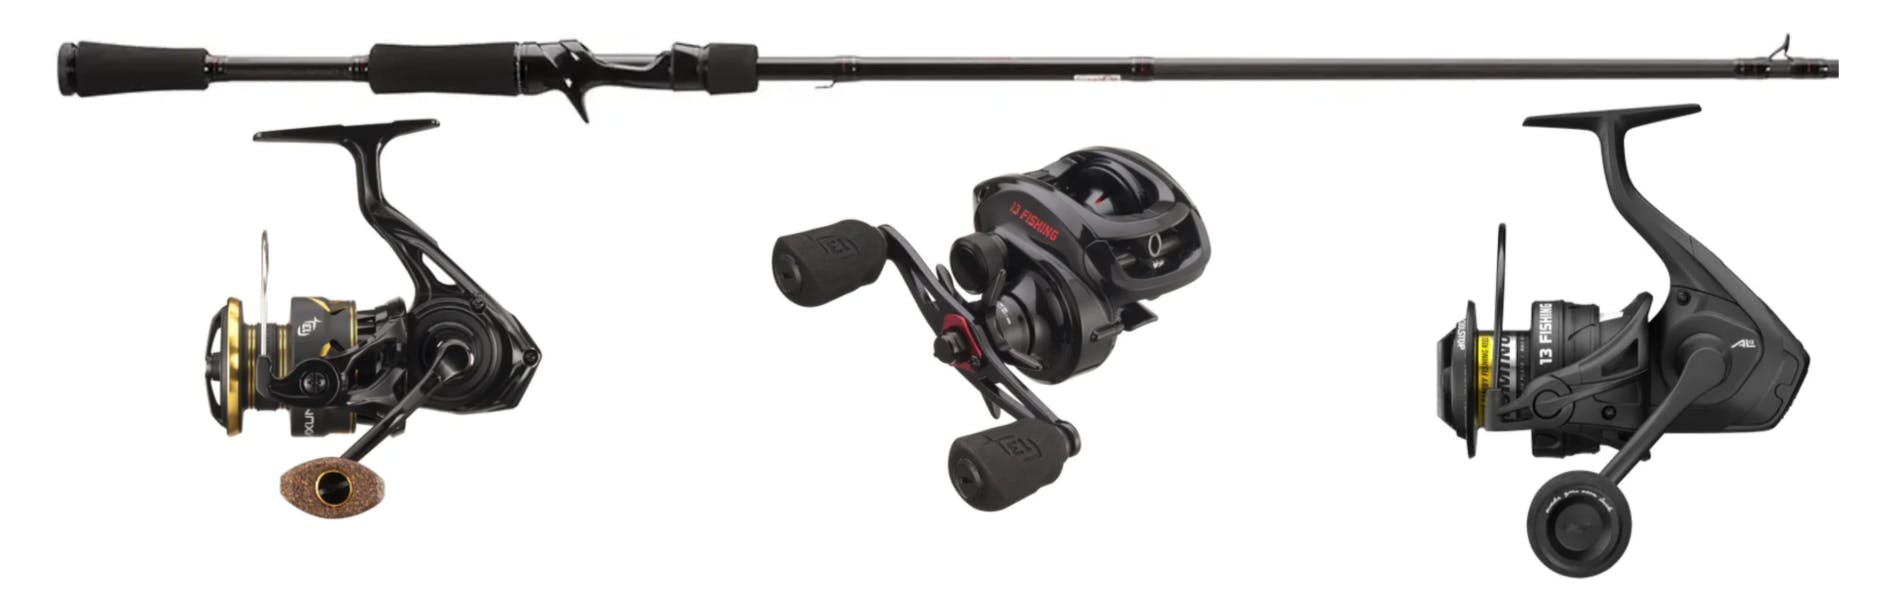 New Product: Axum Spinning Reel From 13 Fishing Bassmaster, 55% OFF